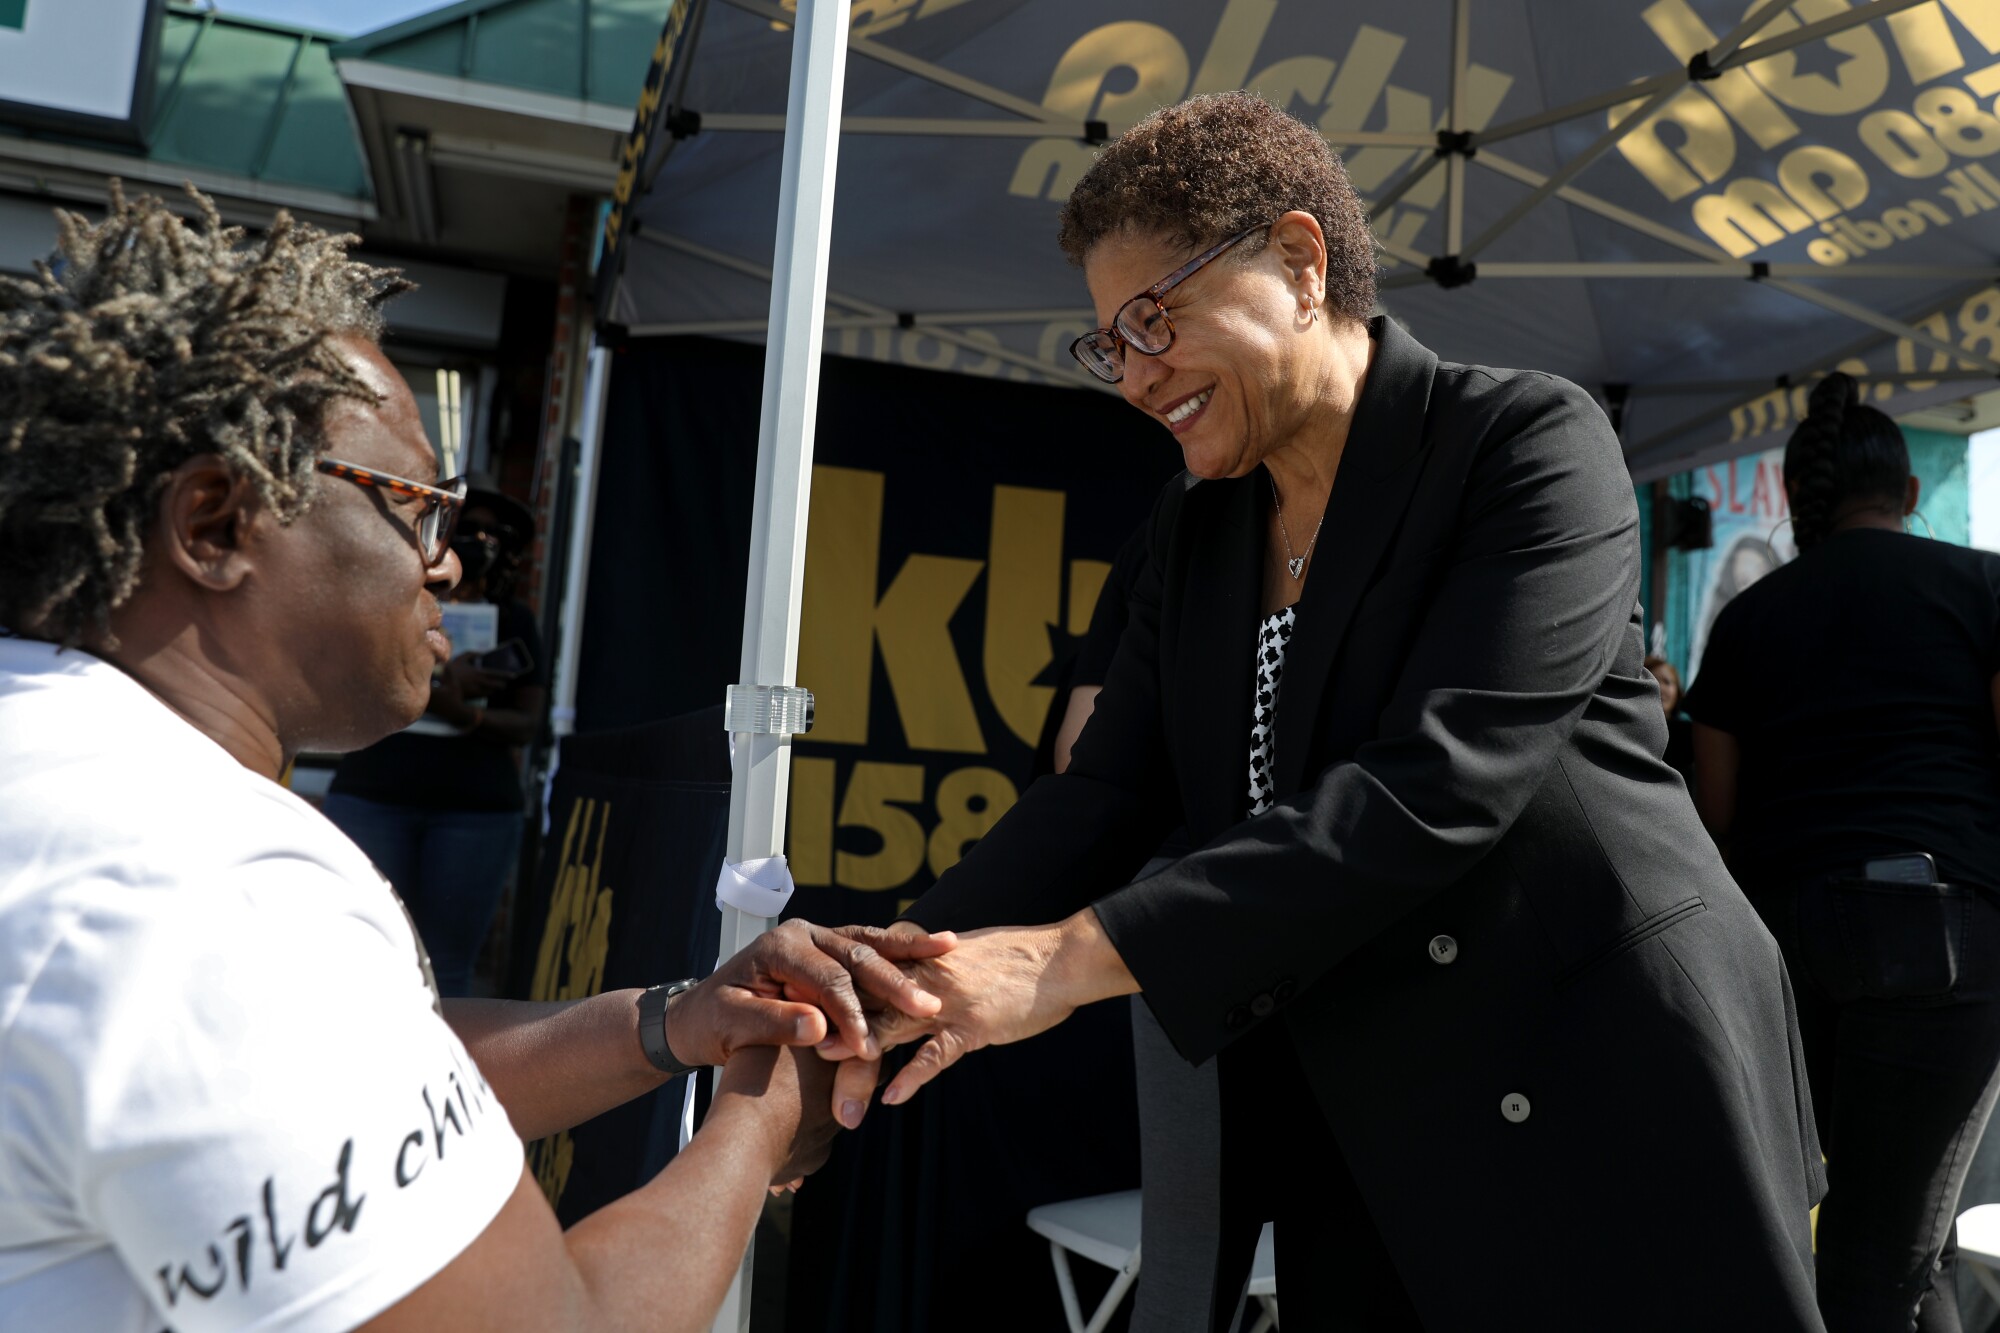 Rep. Karen Bass, right, mayoral candidate for Los Angeles, greets a man.